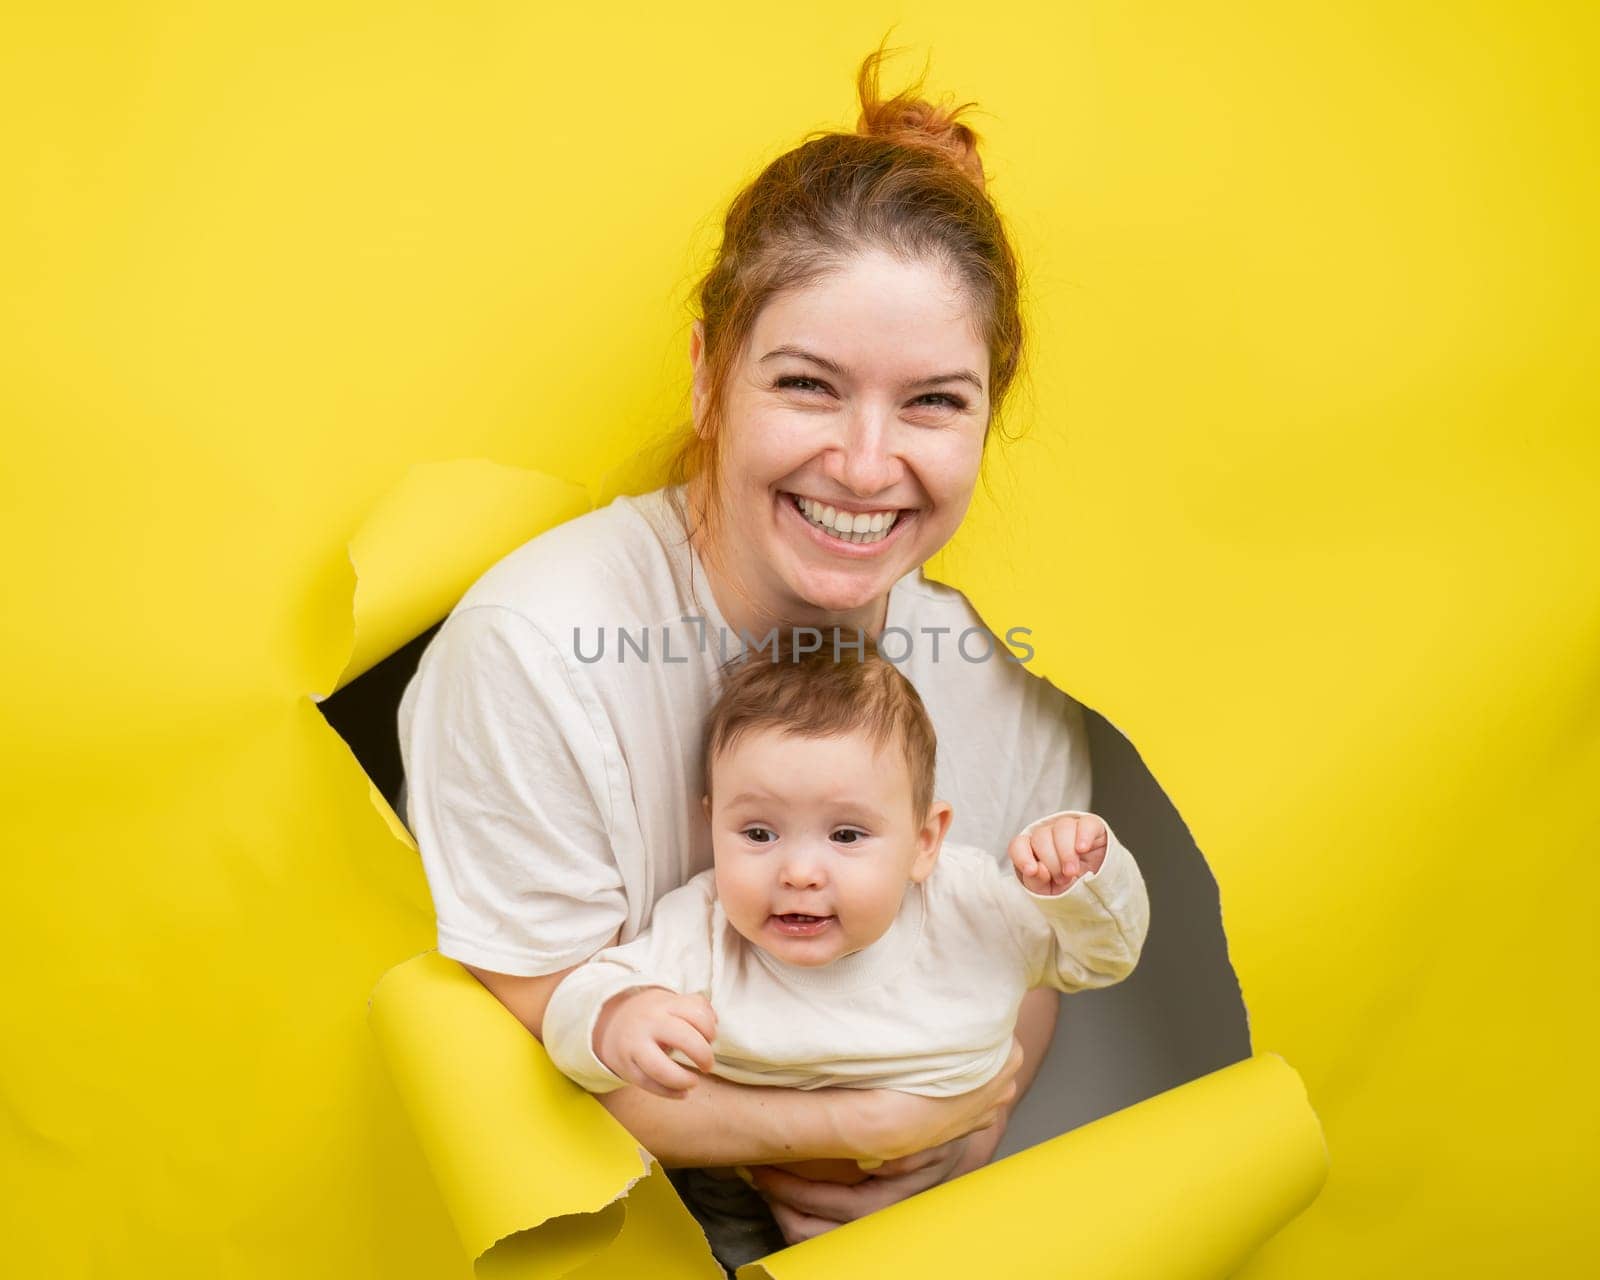 Cheerful Caucasian woman with little son rips and leans out through yellow cardboard background. by mrwed54